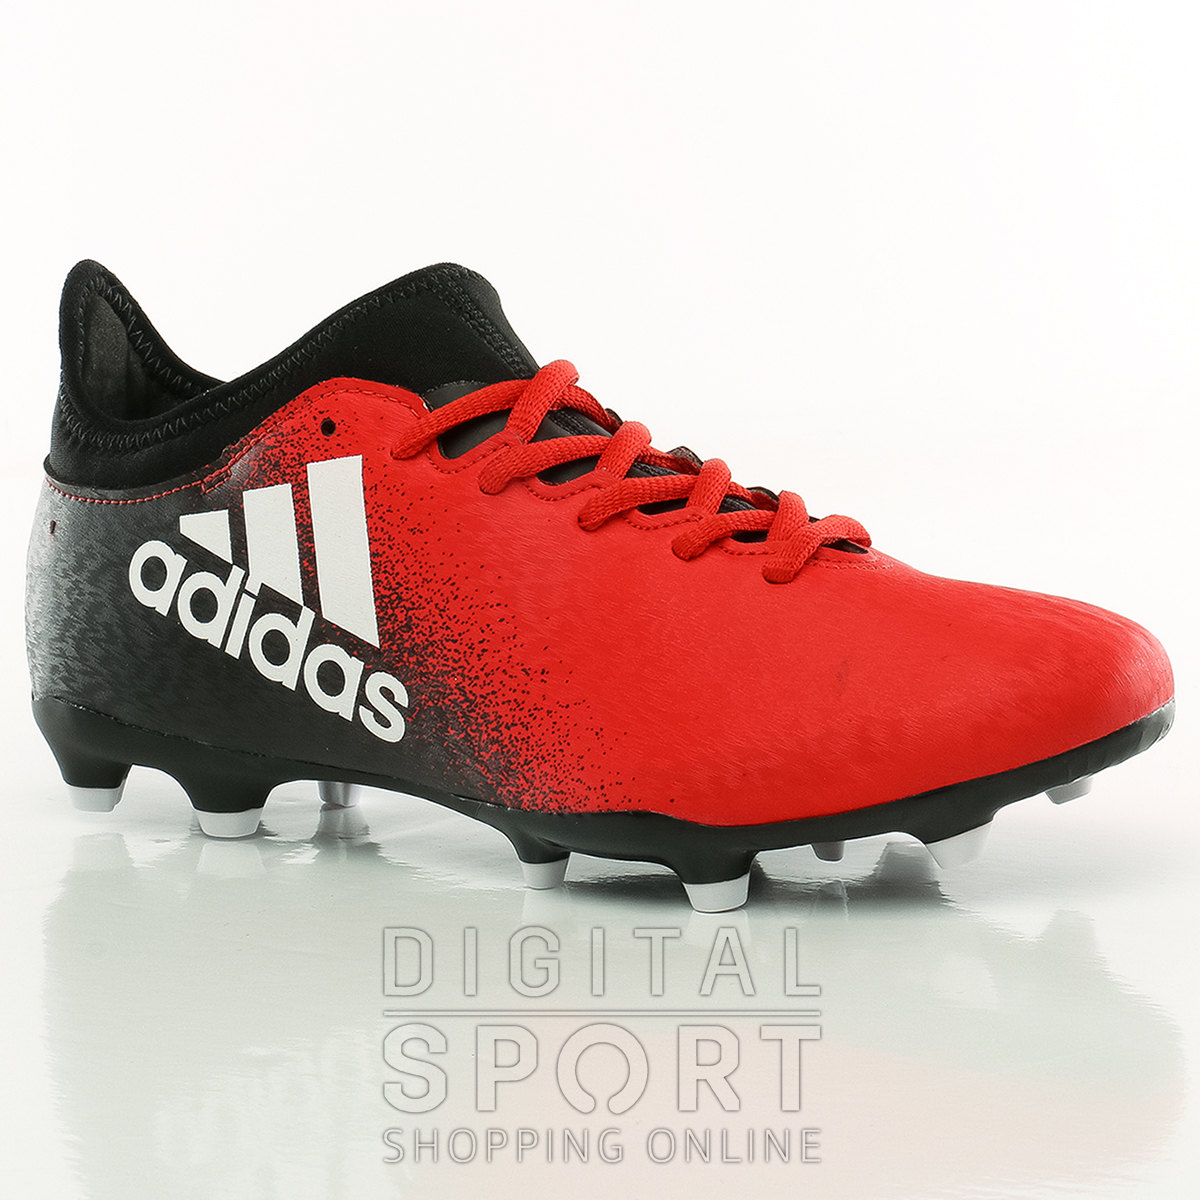 Botines Adidas Techfit X Outlet, 50% OFF | kineto.fit